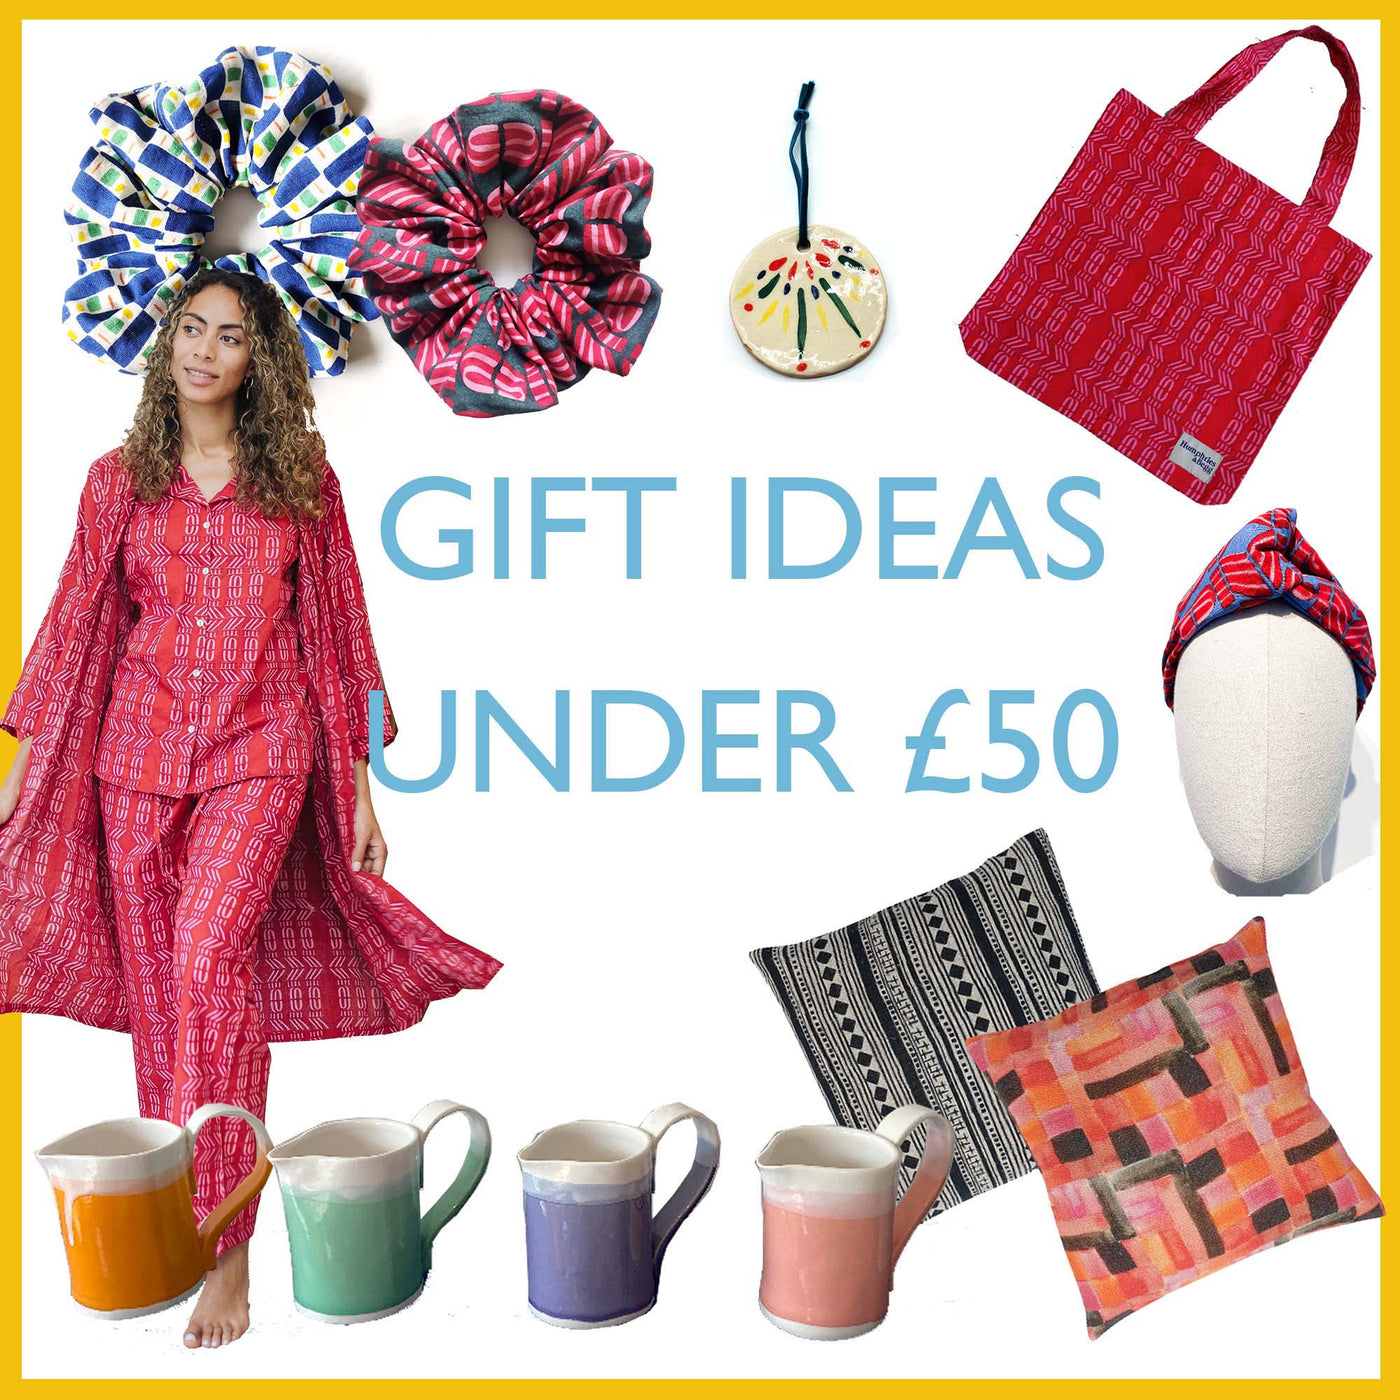 Under £50 Gift Guide